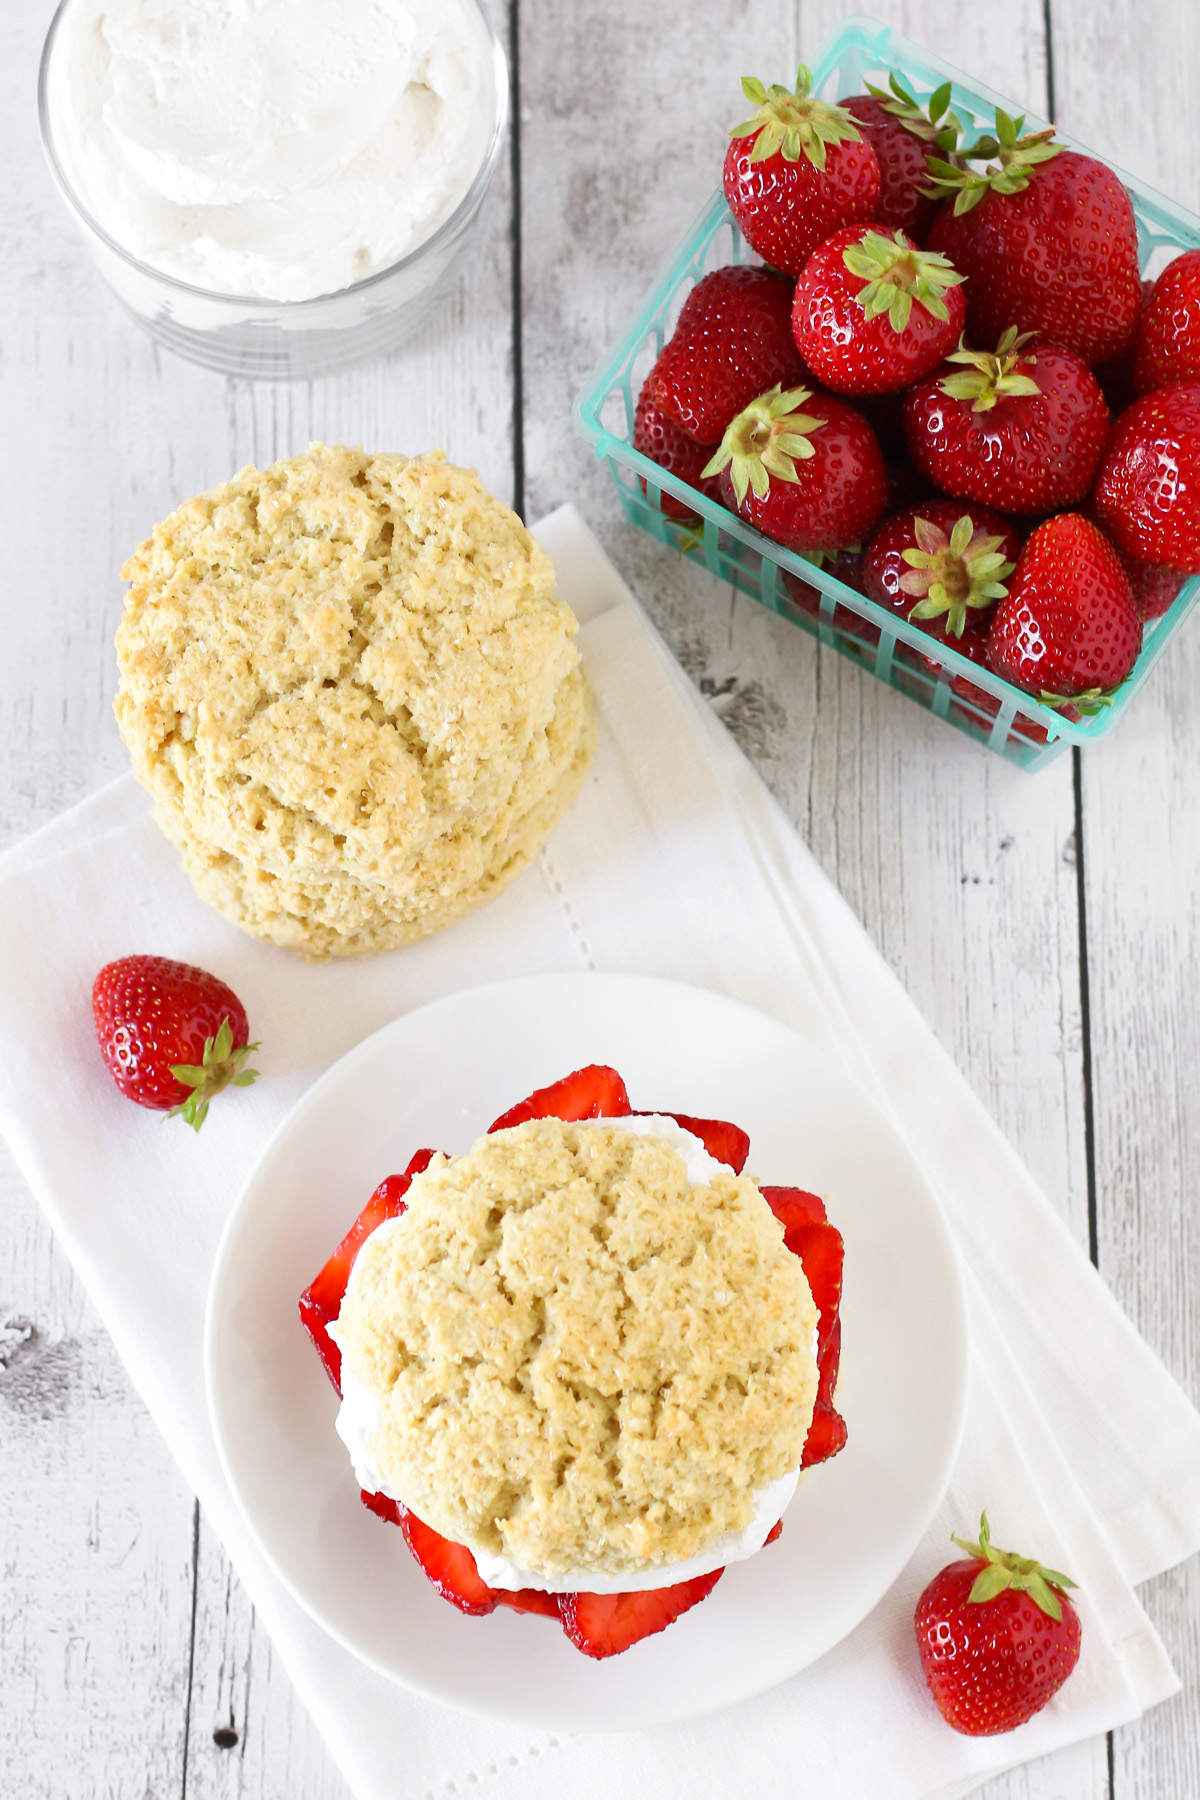 Gluten Free Vegan Classic Strawberry Shortcake. Soft, sweet biscuits, filled with fresh strawberries and whipped coconut cream. A classic summertime dessert!